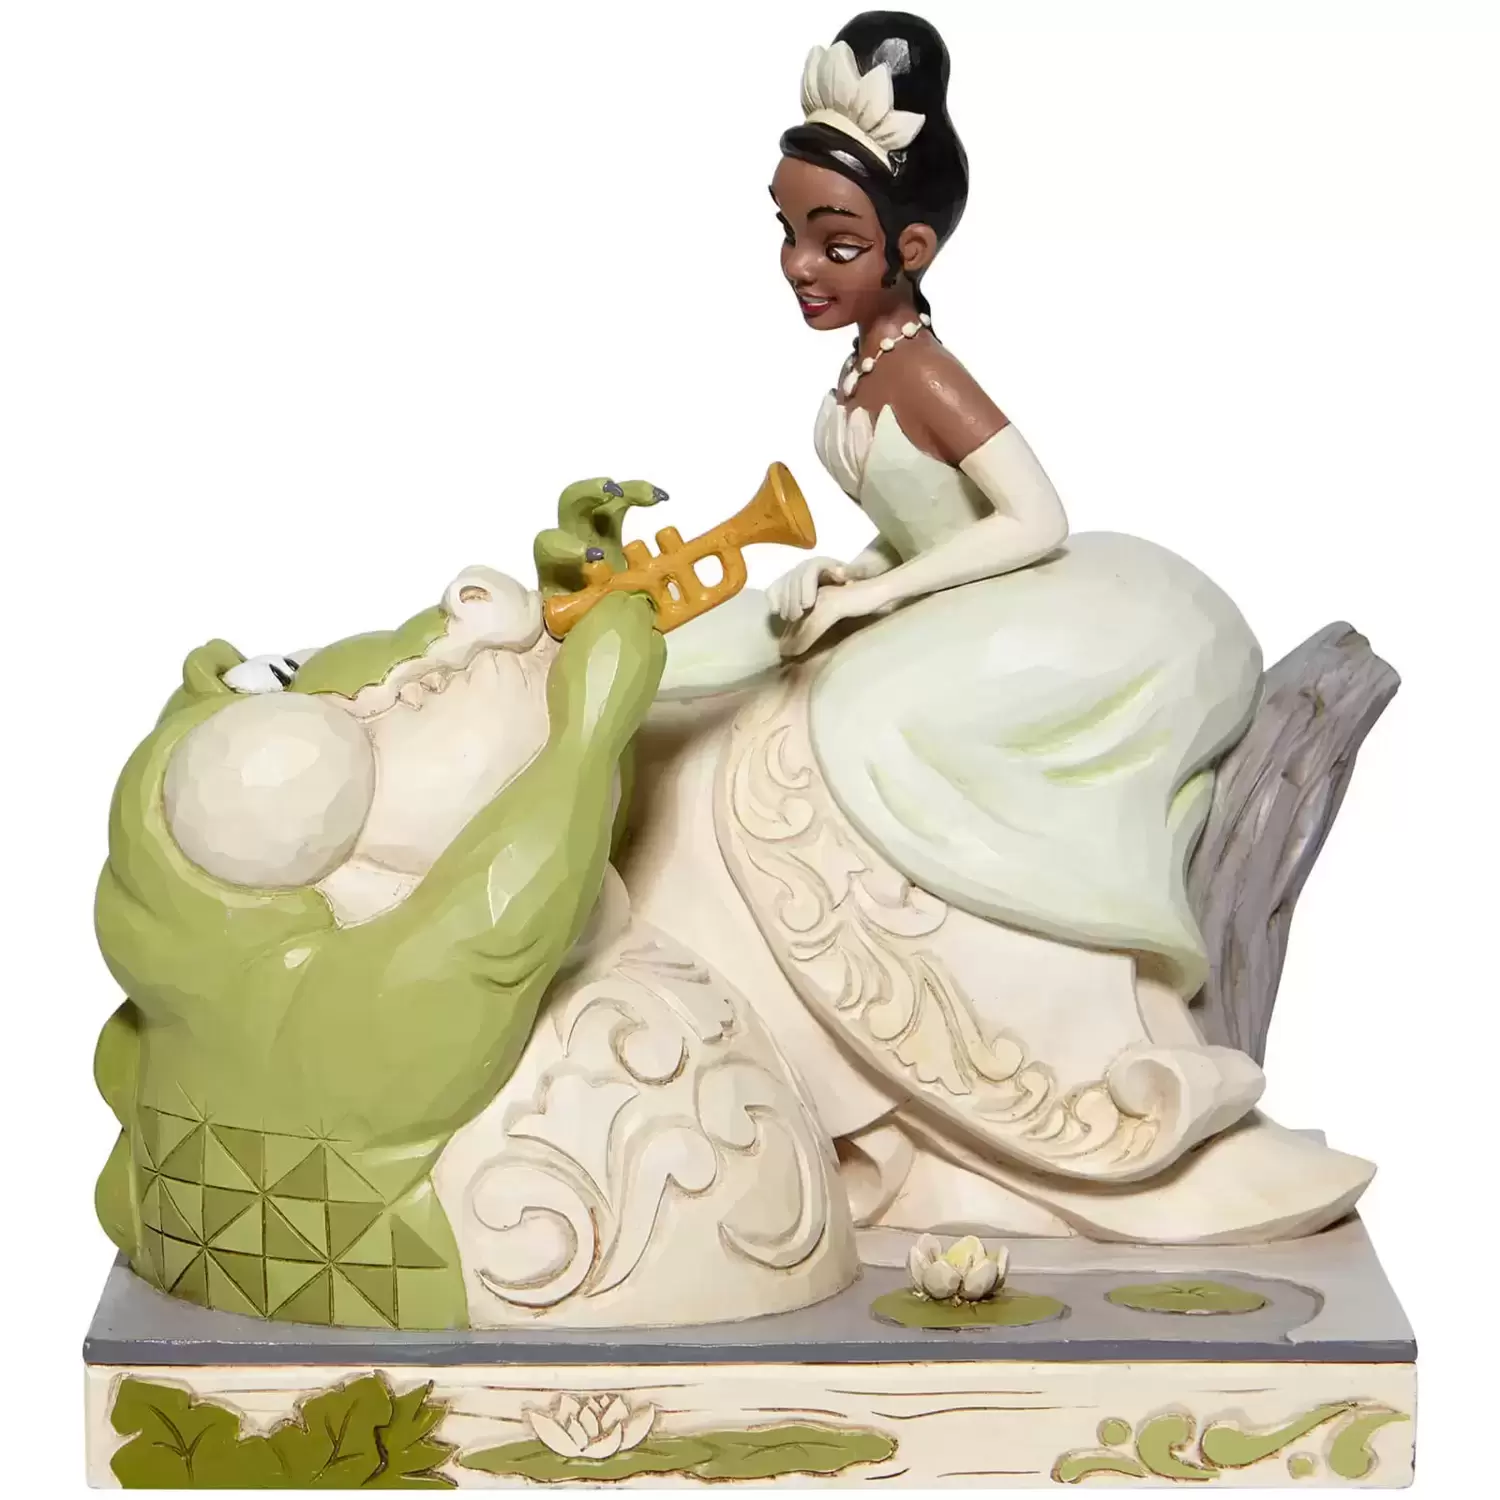 Disney Traditions by Jim Shore - White Woodland Tiana